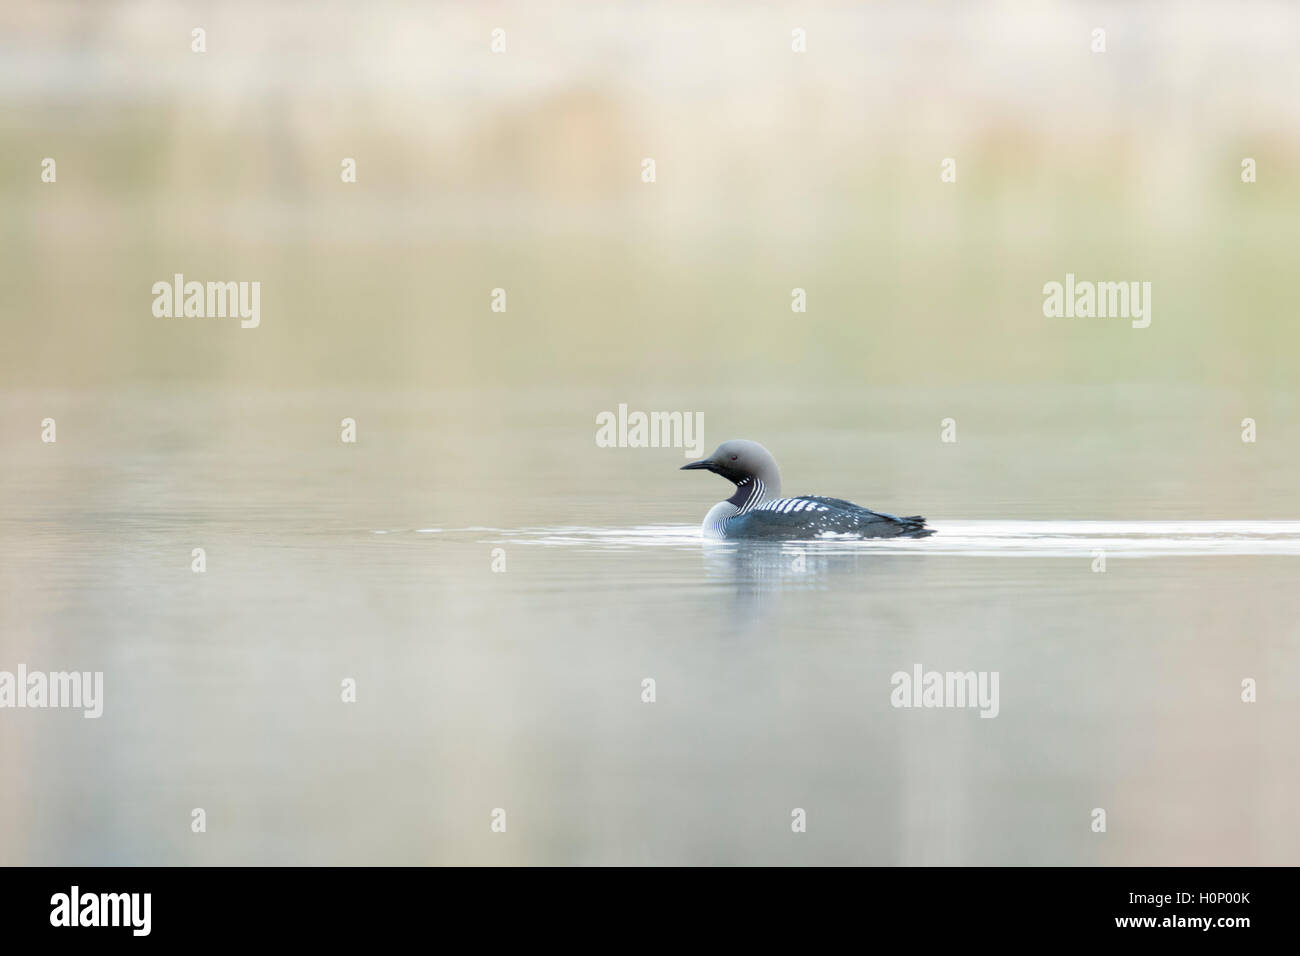 Black-throated Loon / Arctic Loon / Prachttaucher ( Gavia arctica ) in breeding dress, swimming on a lake, in distance, Sweden. Stock Photo